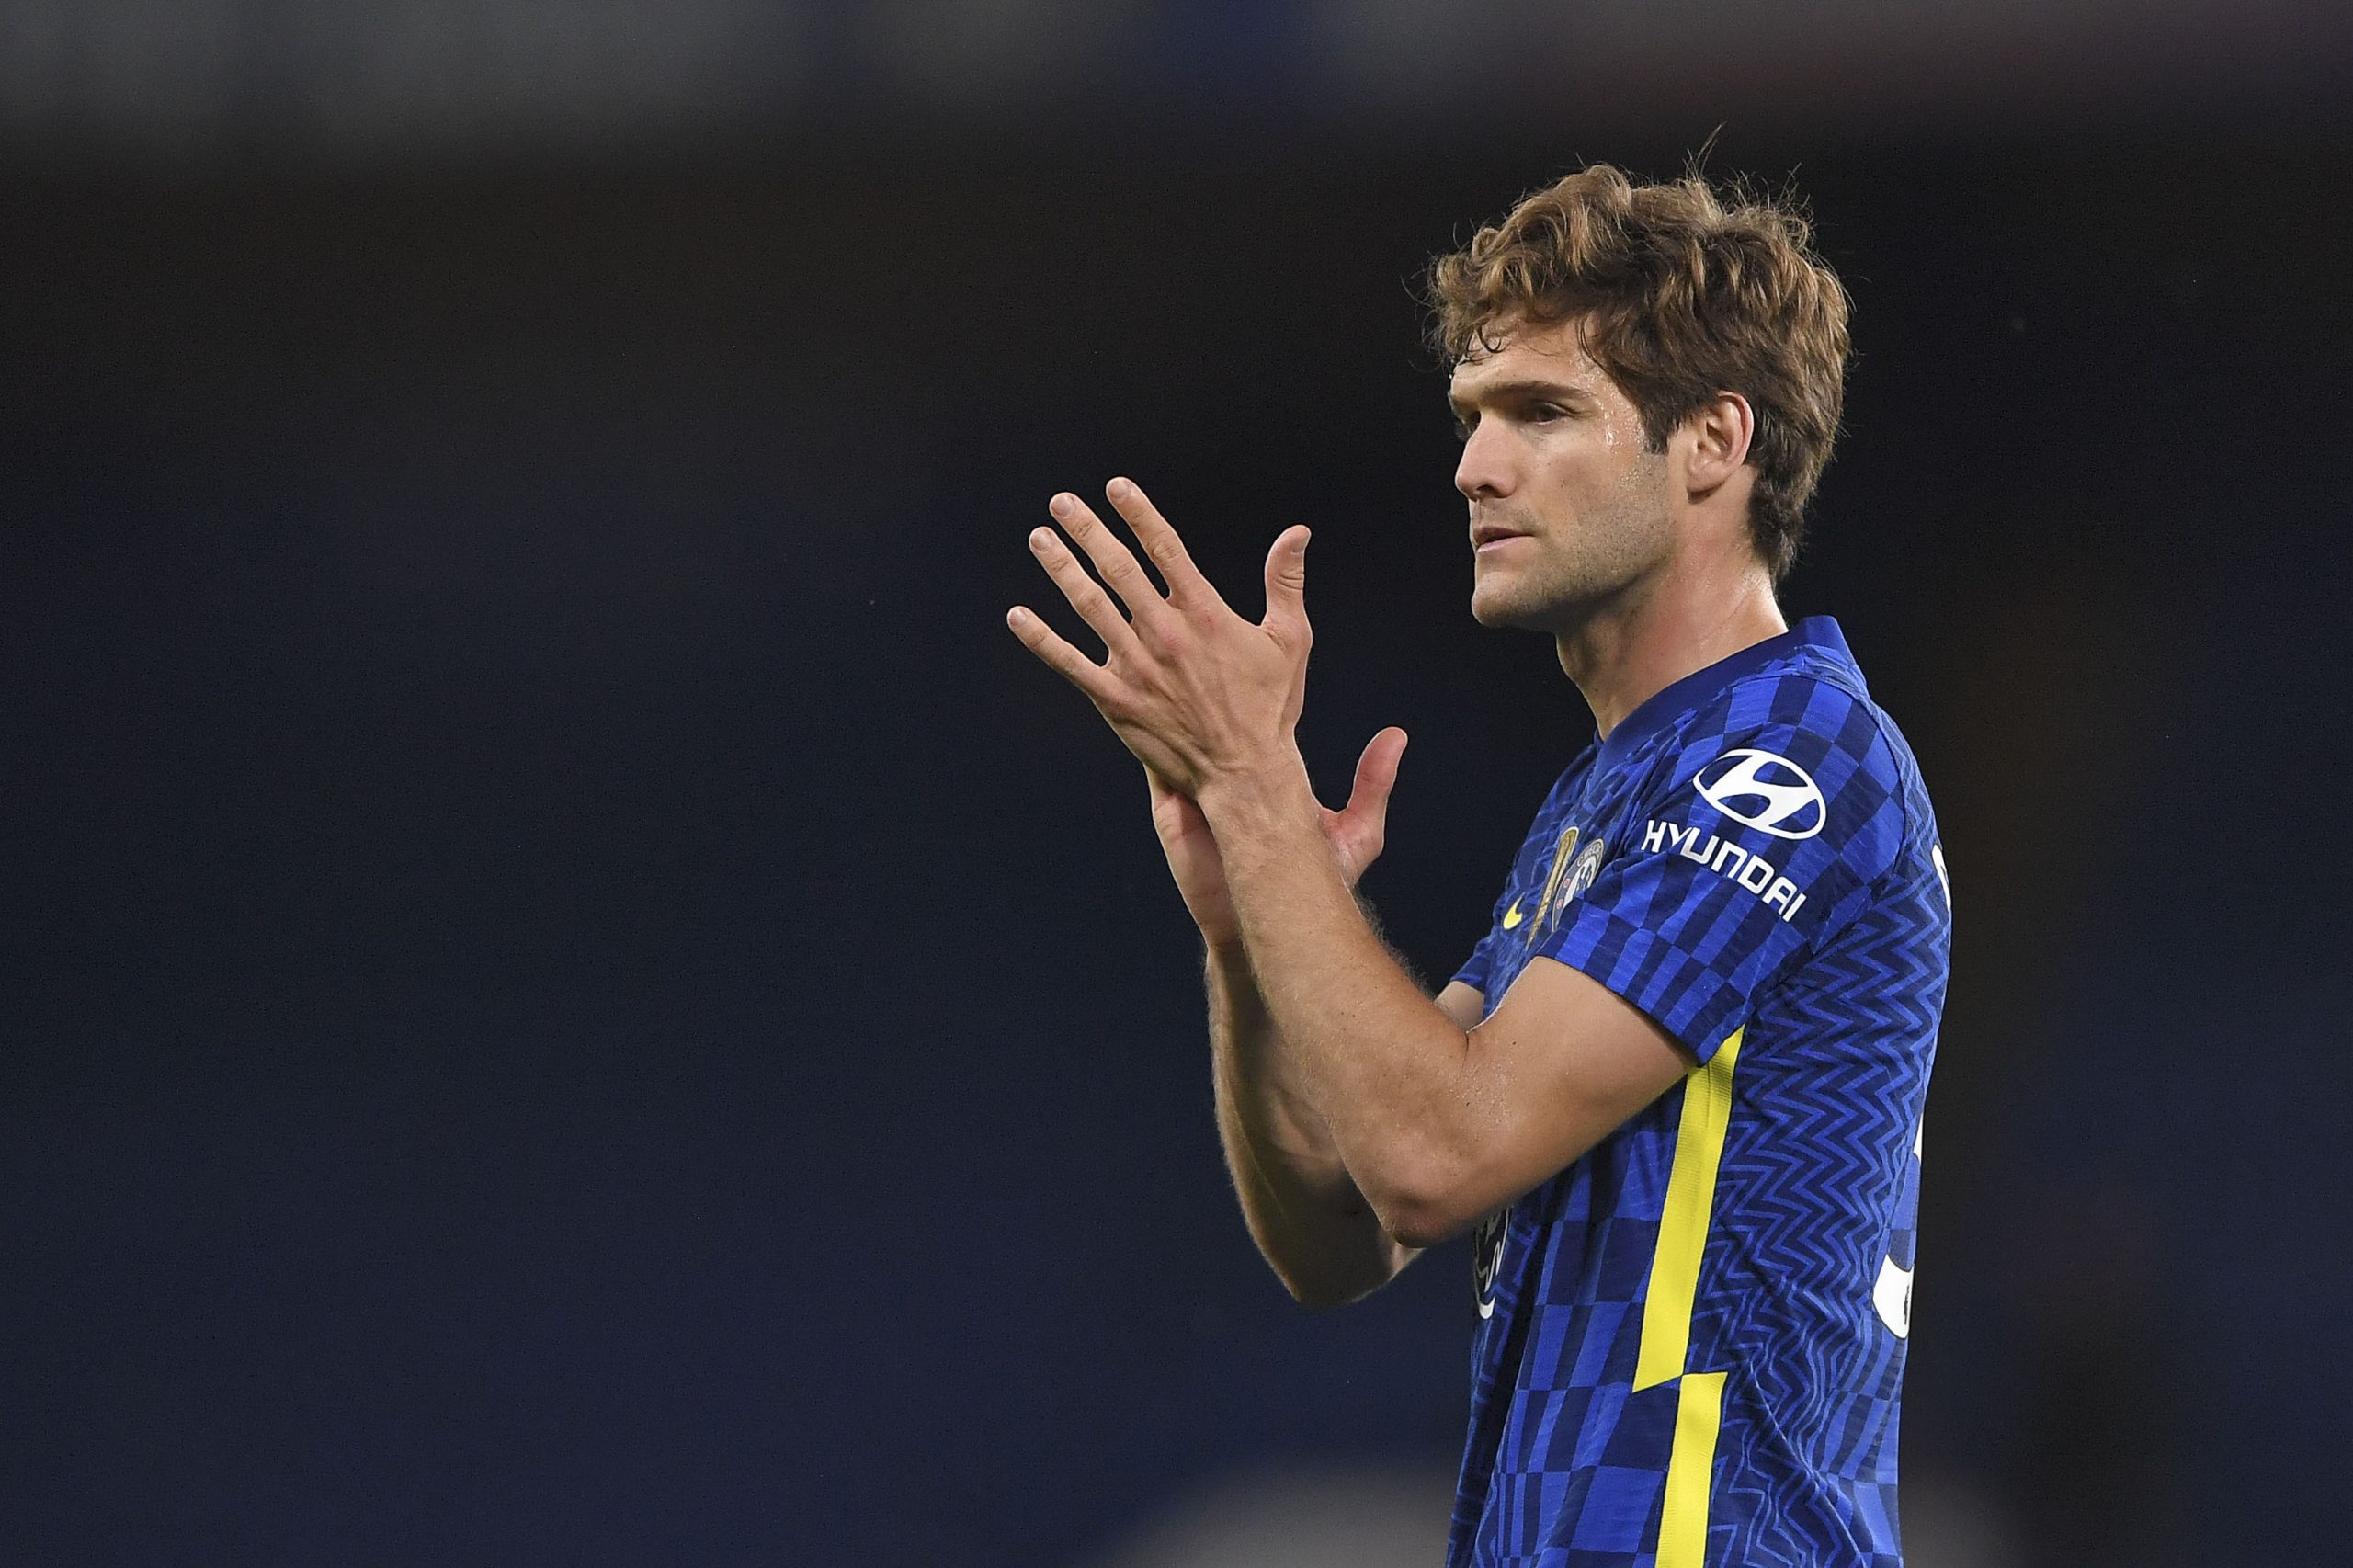 OFFICIAL: Marcos Alonso terminates Chelsea contract ahead of Bar  manchester united jersey price in kenya  celona move